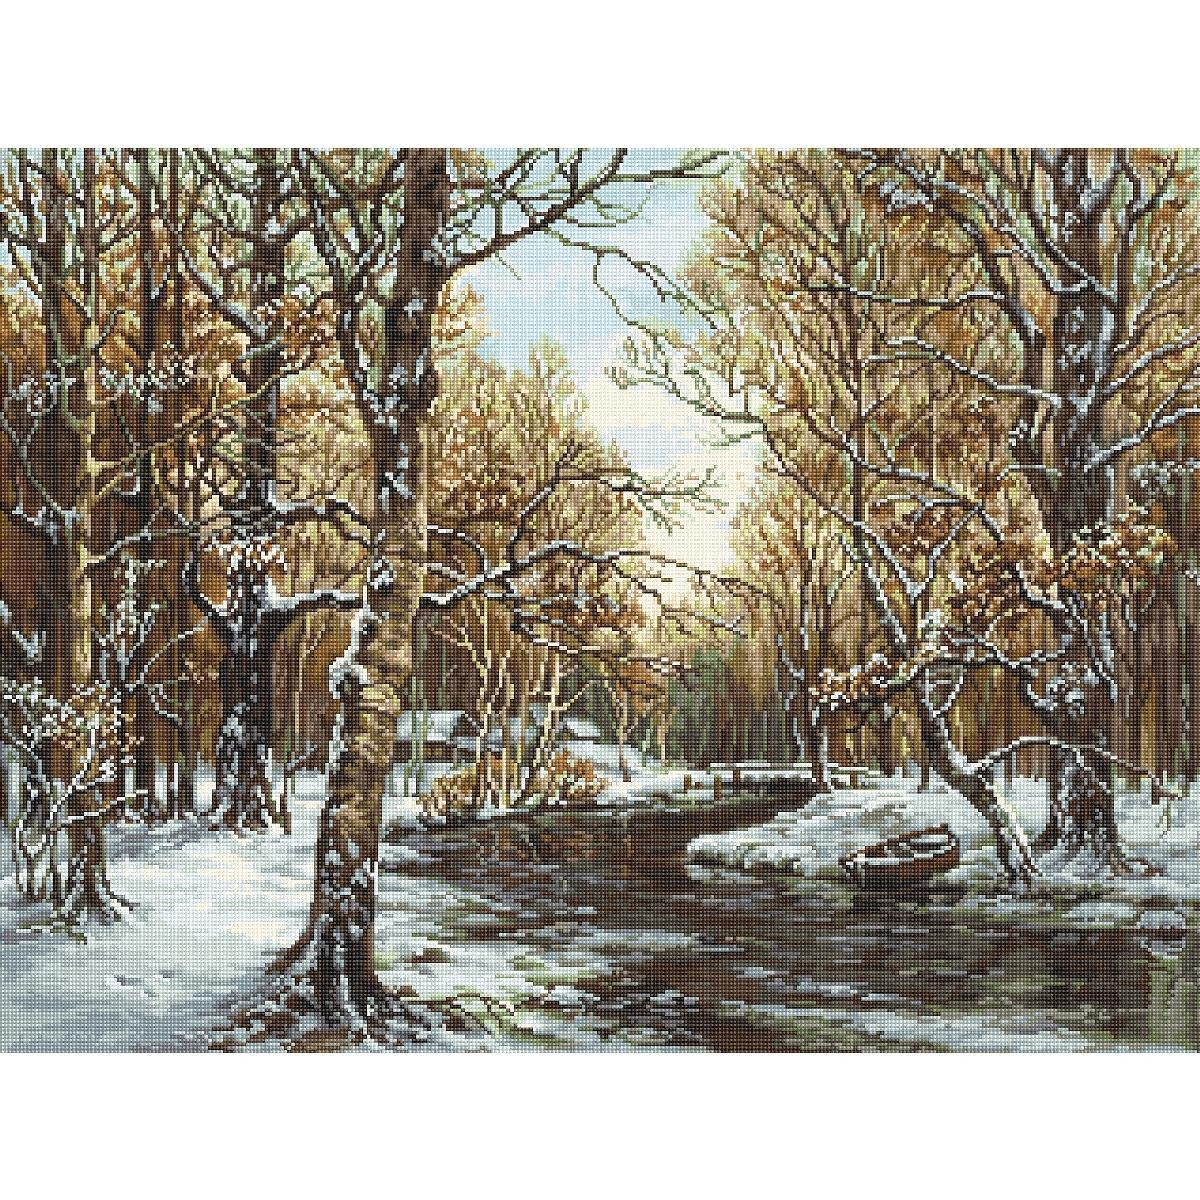 A tranquil winter landscape shows a snow-covered forest...